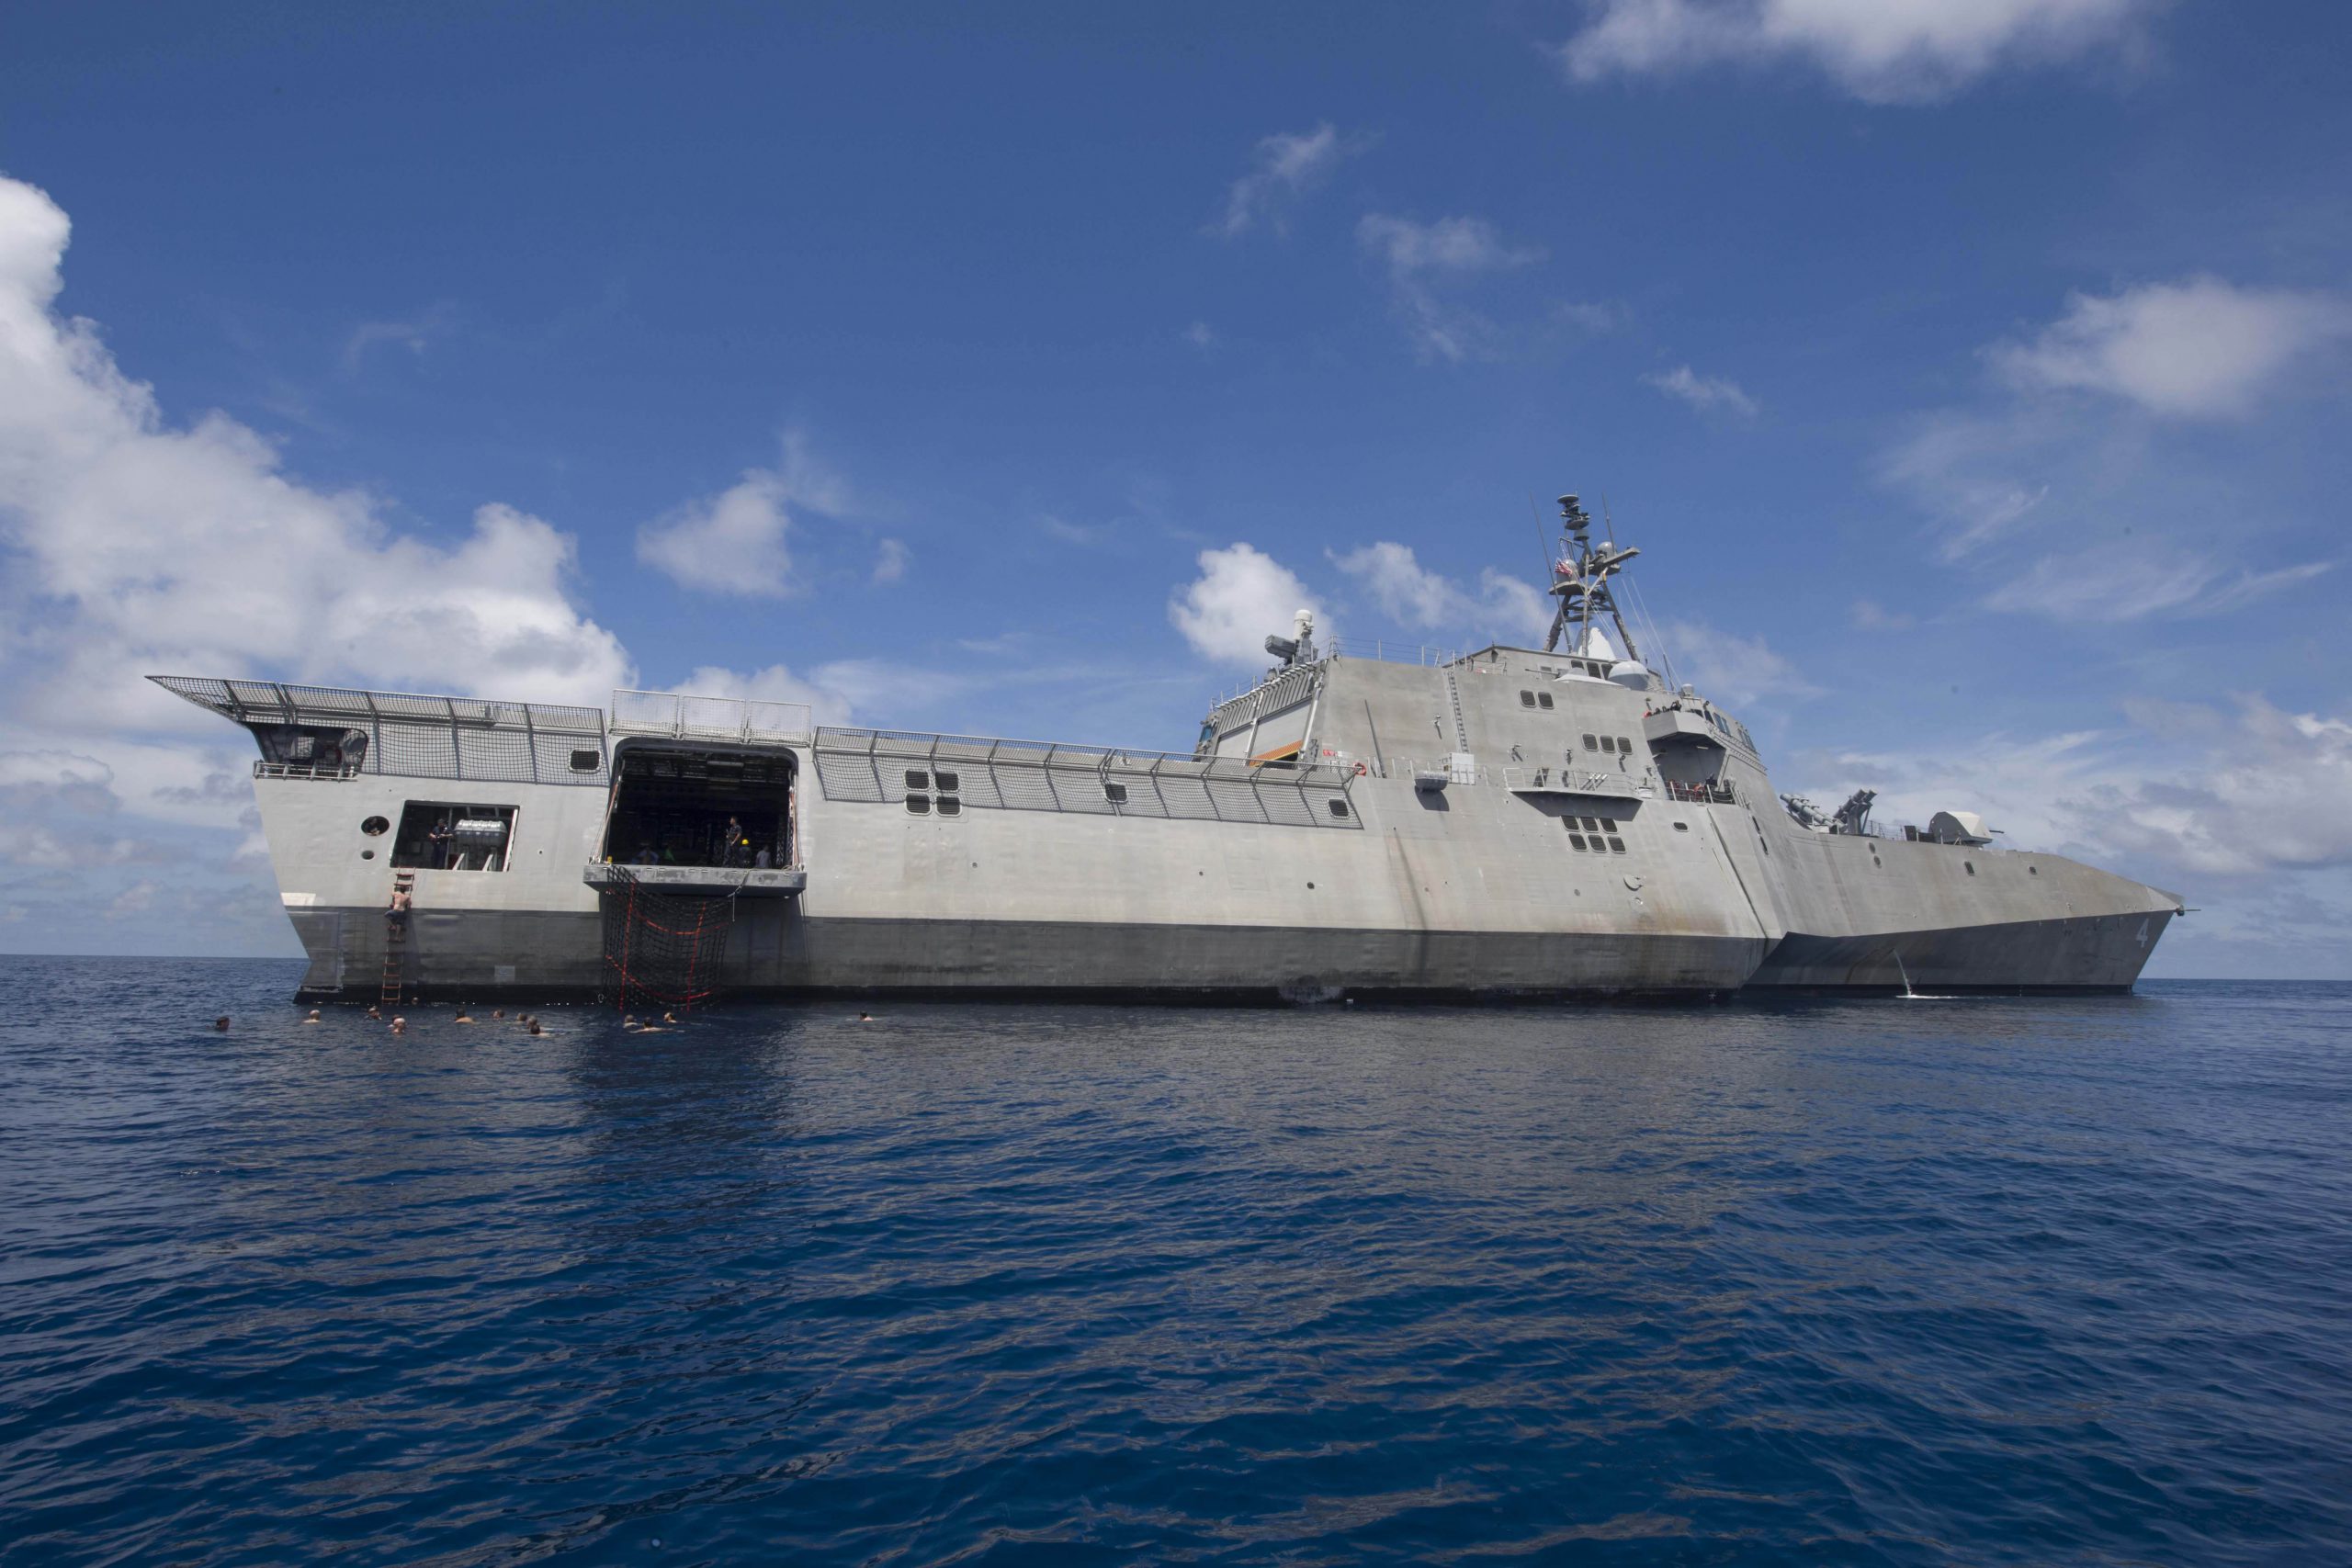 Sailors assigned to the littoral combat ship USS Coronado swim in the South China Sea, Feb. 23, 2017. Coronado is a fast and agile warship tailor-made to patrol the region's littorals and work with partner navies, providing the U.S. 7th Fleet with the flexible capabilities it needs now and into the future. Navy photo by Petty Officer 2nd Class Amy M. Ressler. -